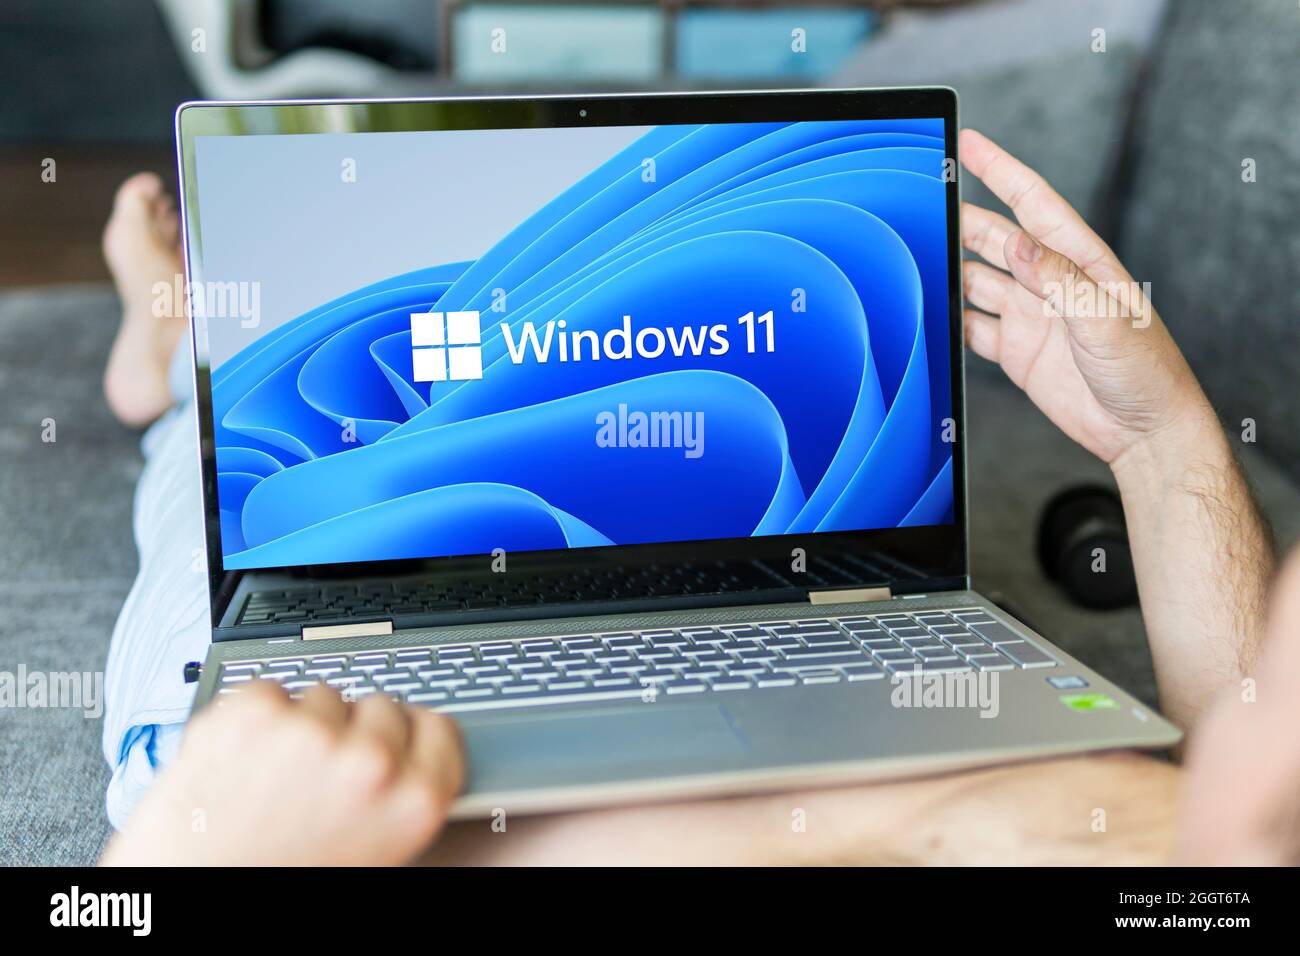 June 23, 2021. Barnaul, Russia. Windows 11 logo on laptop screen. A new operating system update from Microsoft Stock Photo